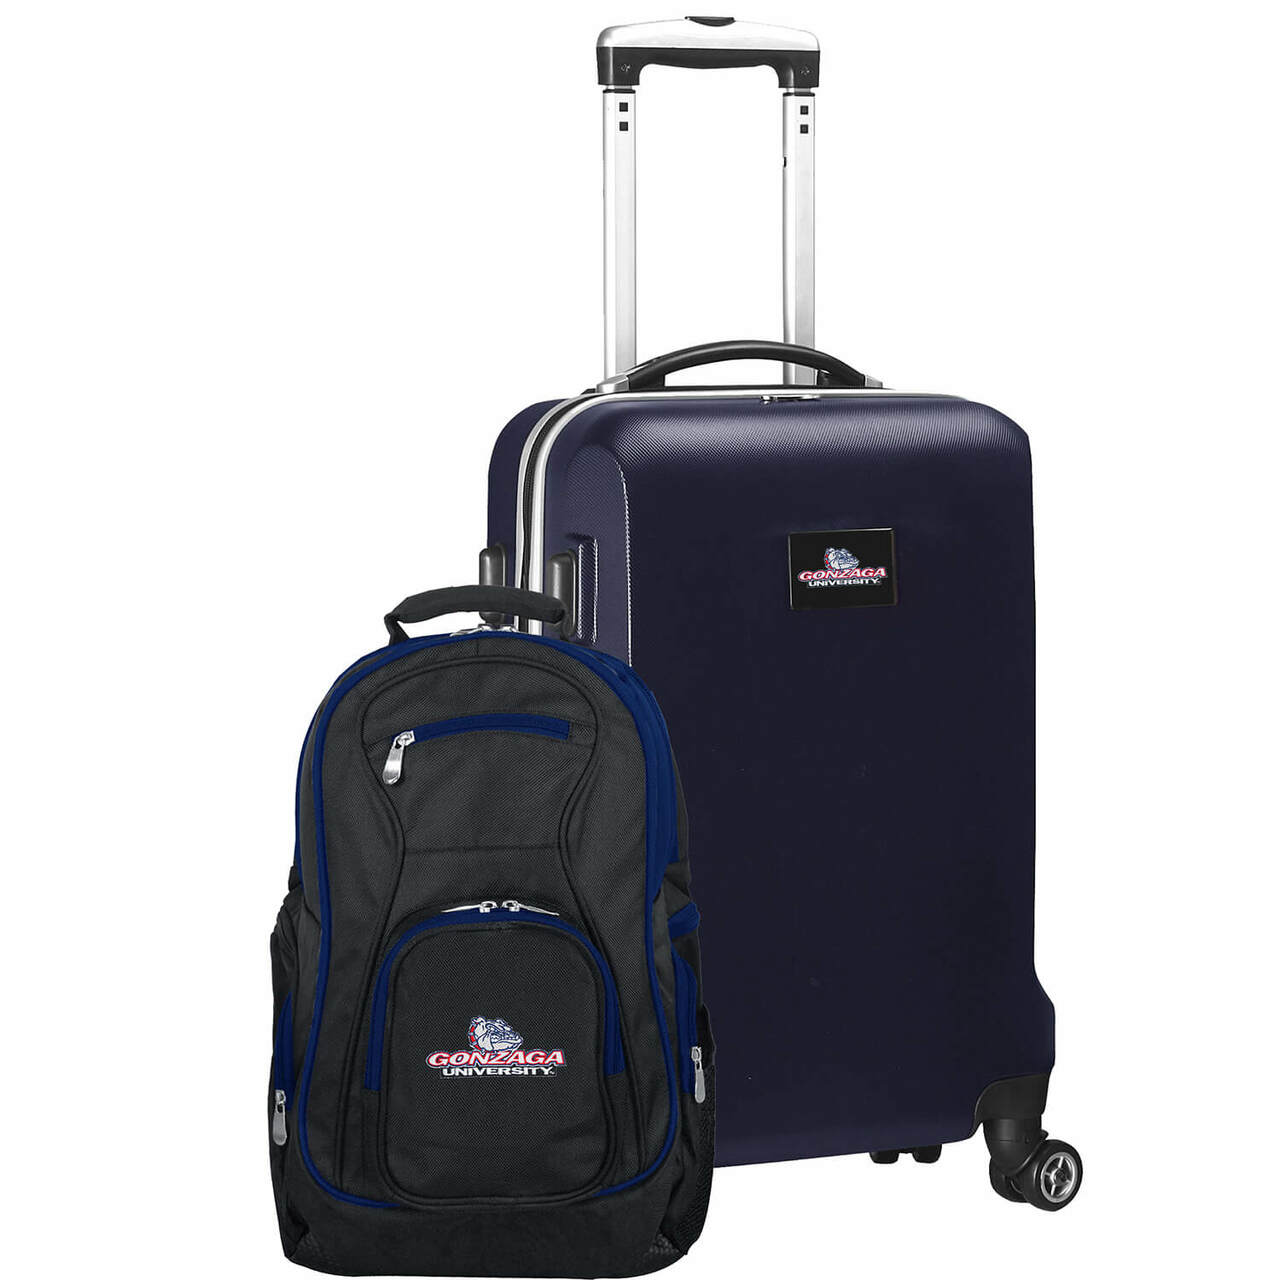 Gonzaga University Bulldogs Deluxe 2-Piece Backpack and Carry-on Set in Navy